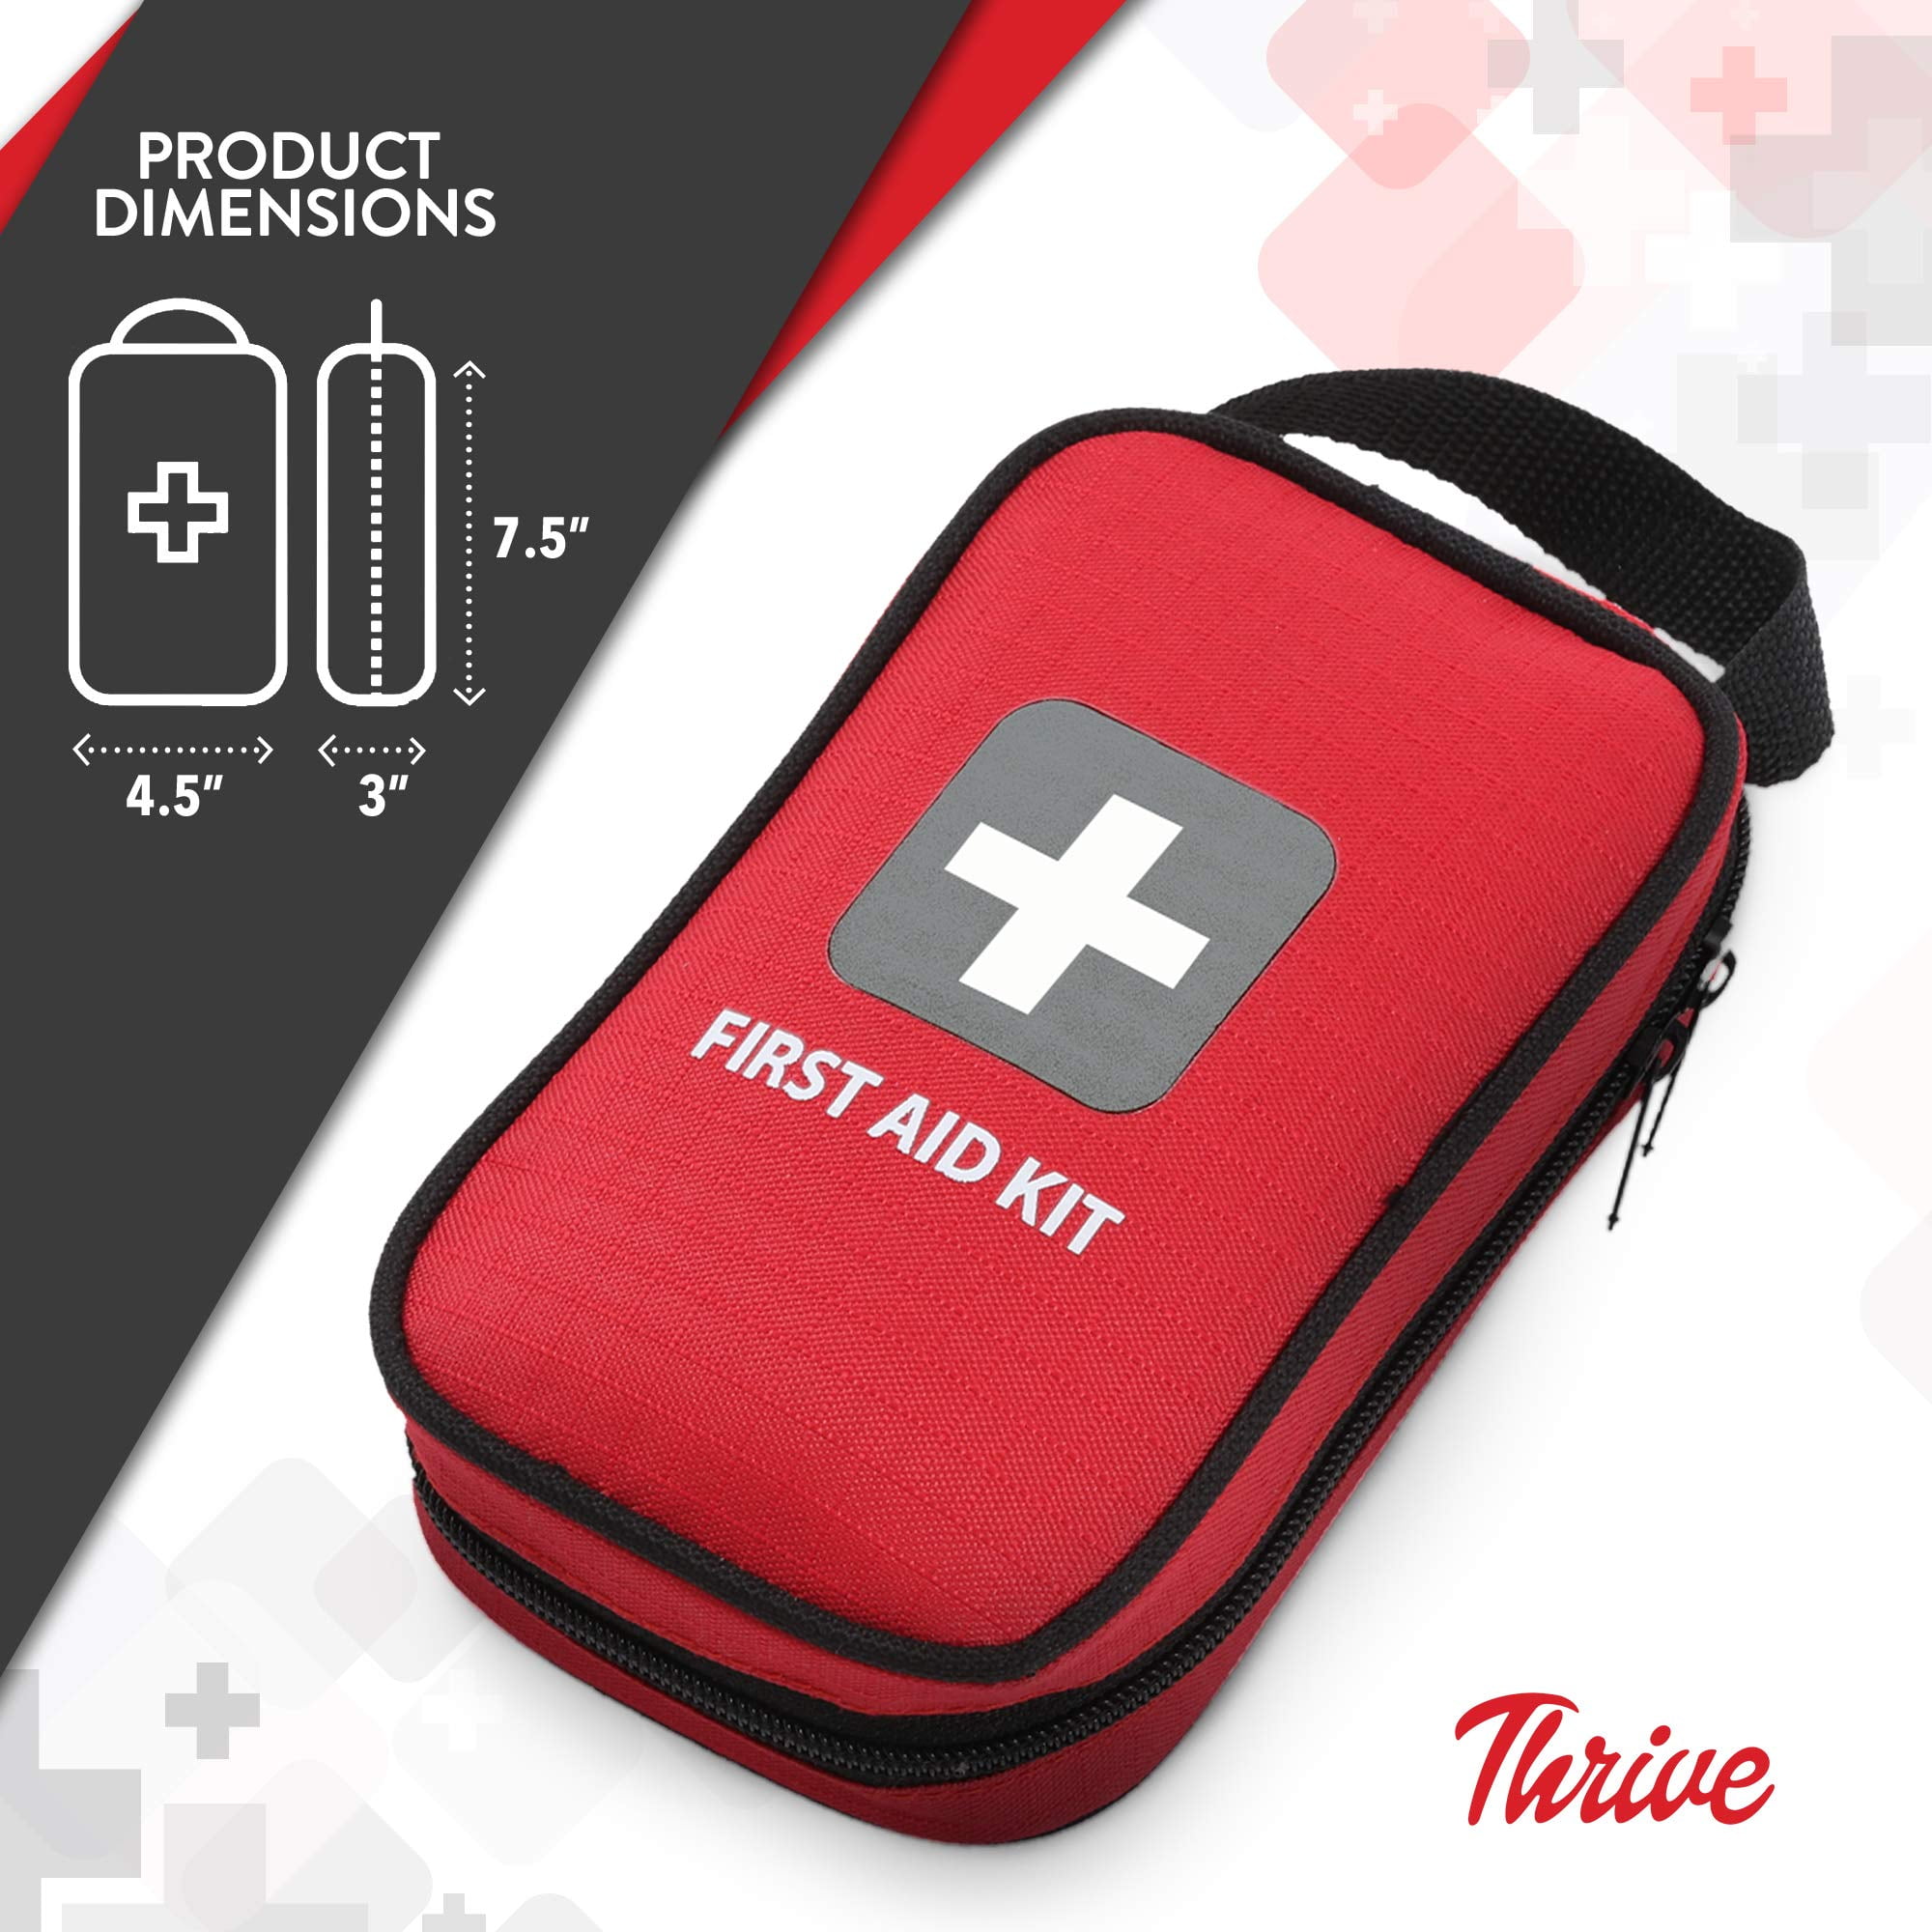 Thrive First Aid Kit (100 Pieces) - First Aid Bag with Hospital Grade  Medical Supplies - Emergency Accessories for Compact Size for Car Trip,  Camp